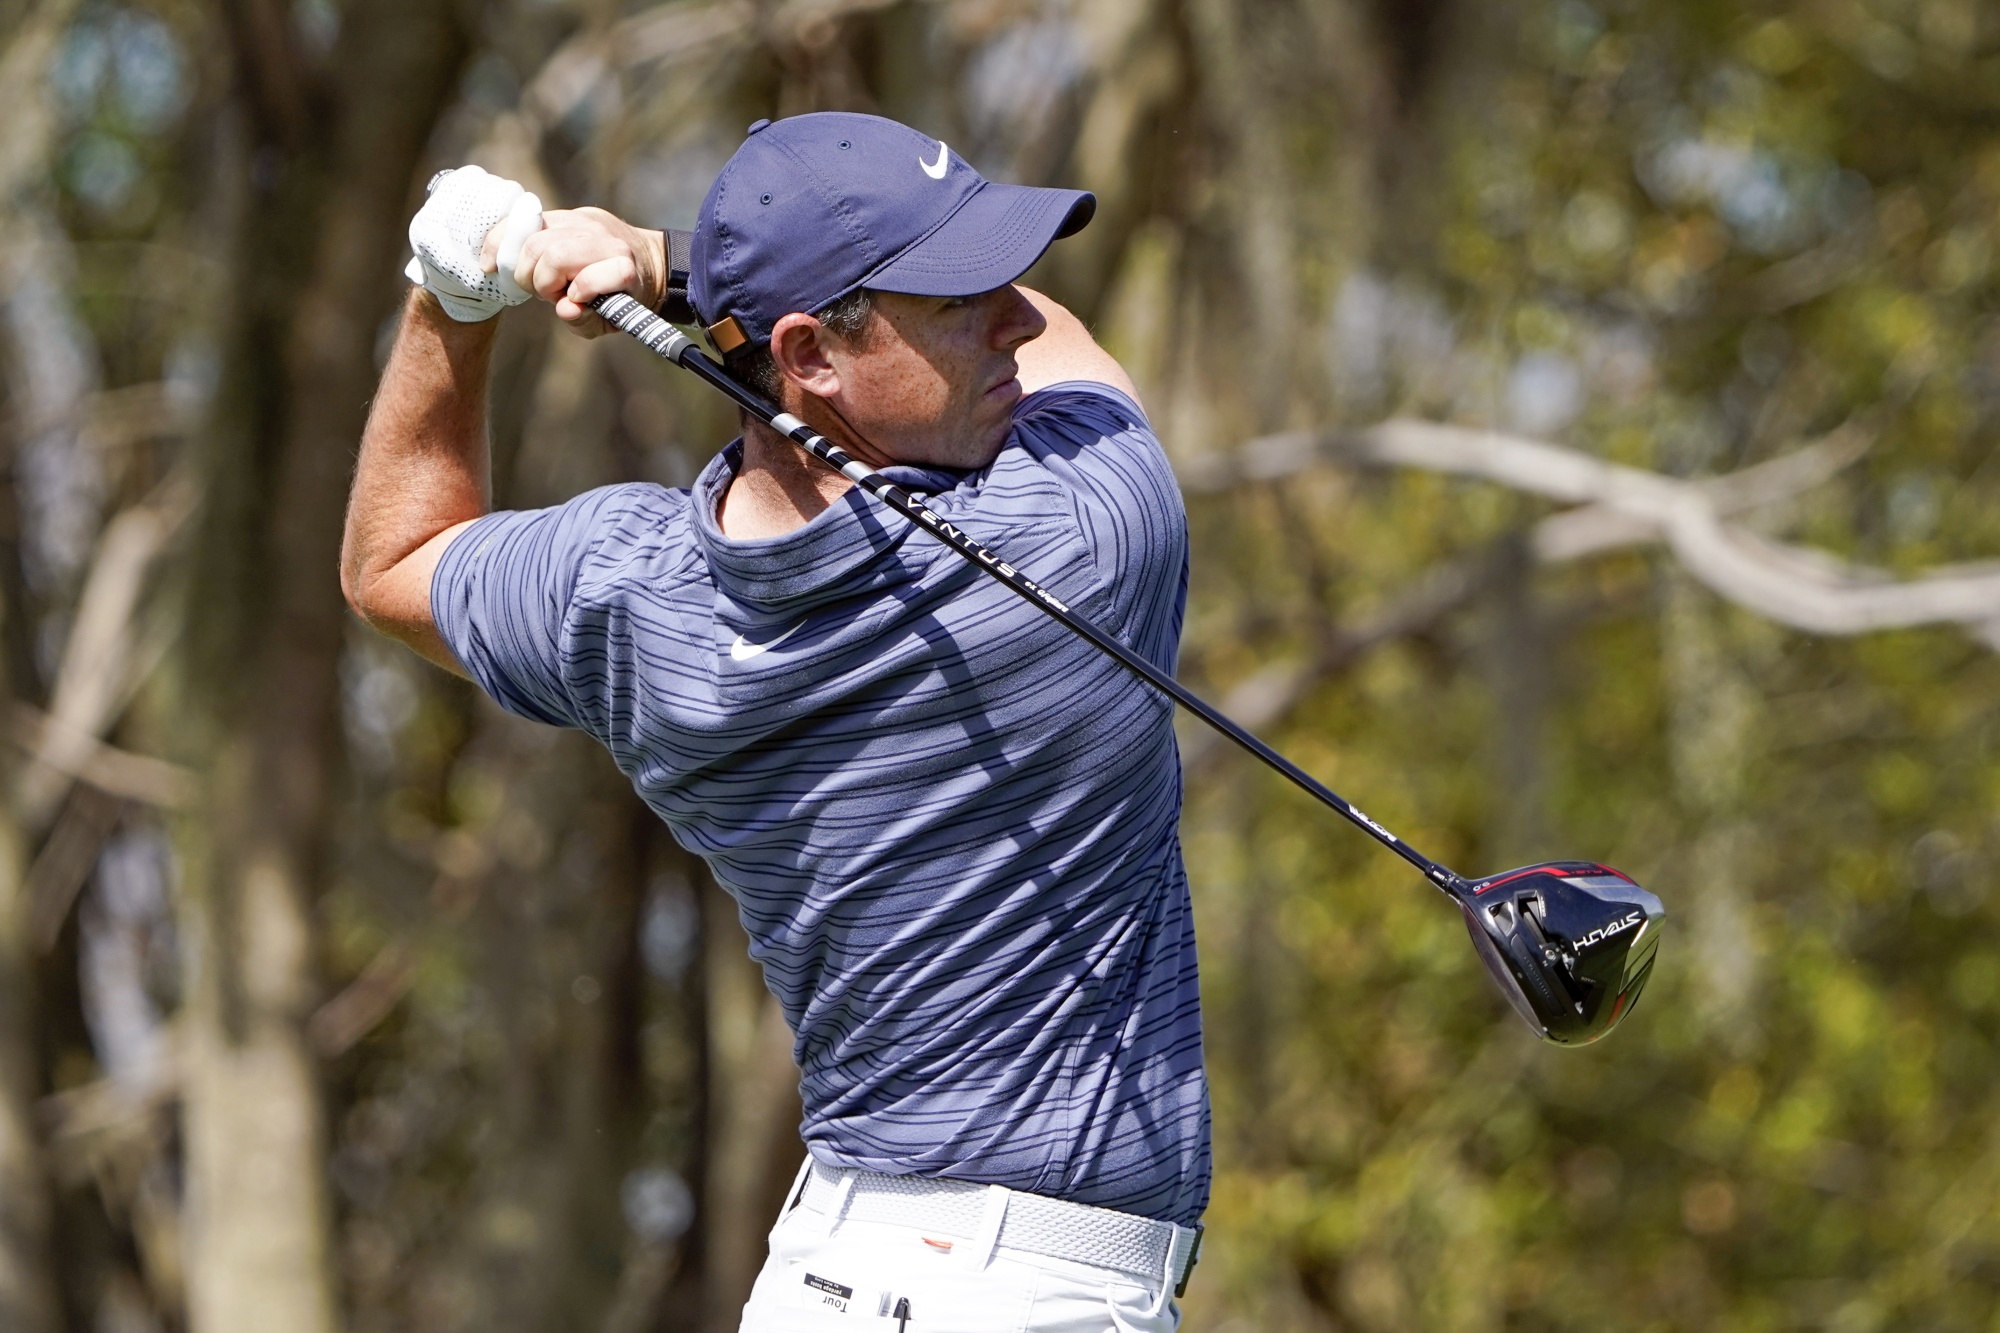 Rory McIlroy With 65 Off to Another Great Start At Bay Hill